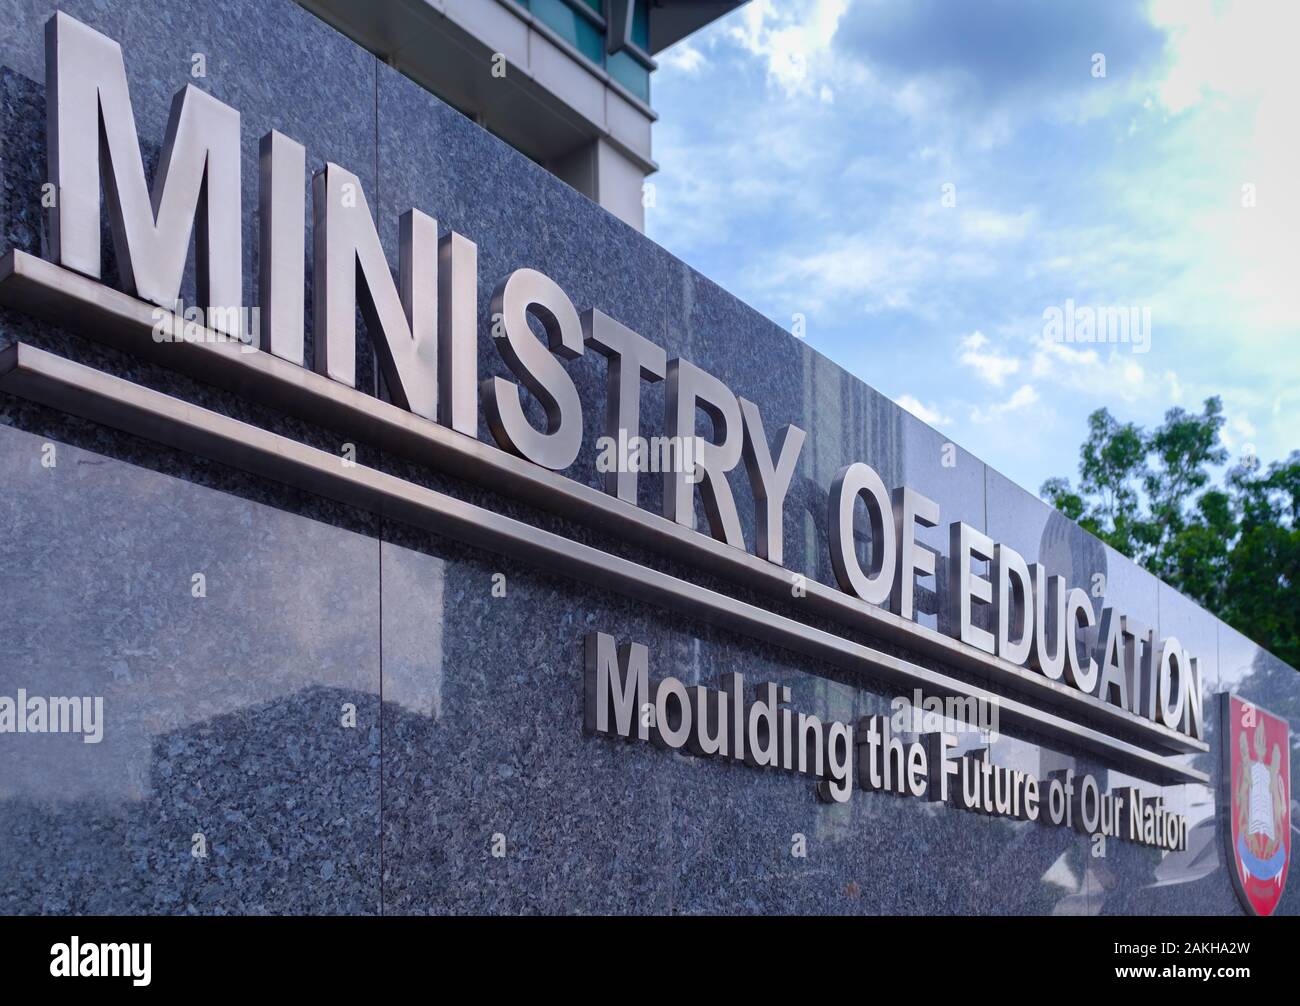 Singapore-22 DEC 2017: Singapore ministry of education plaque perspective view Stock Photo